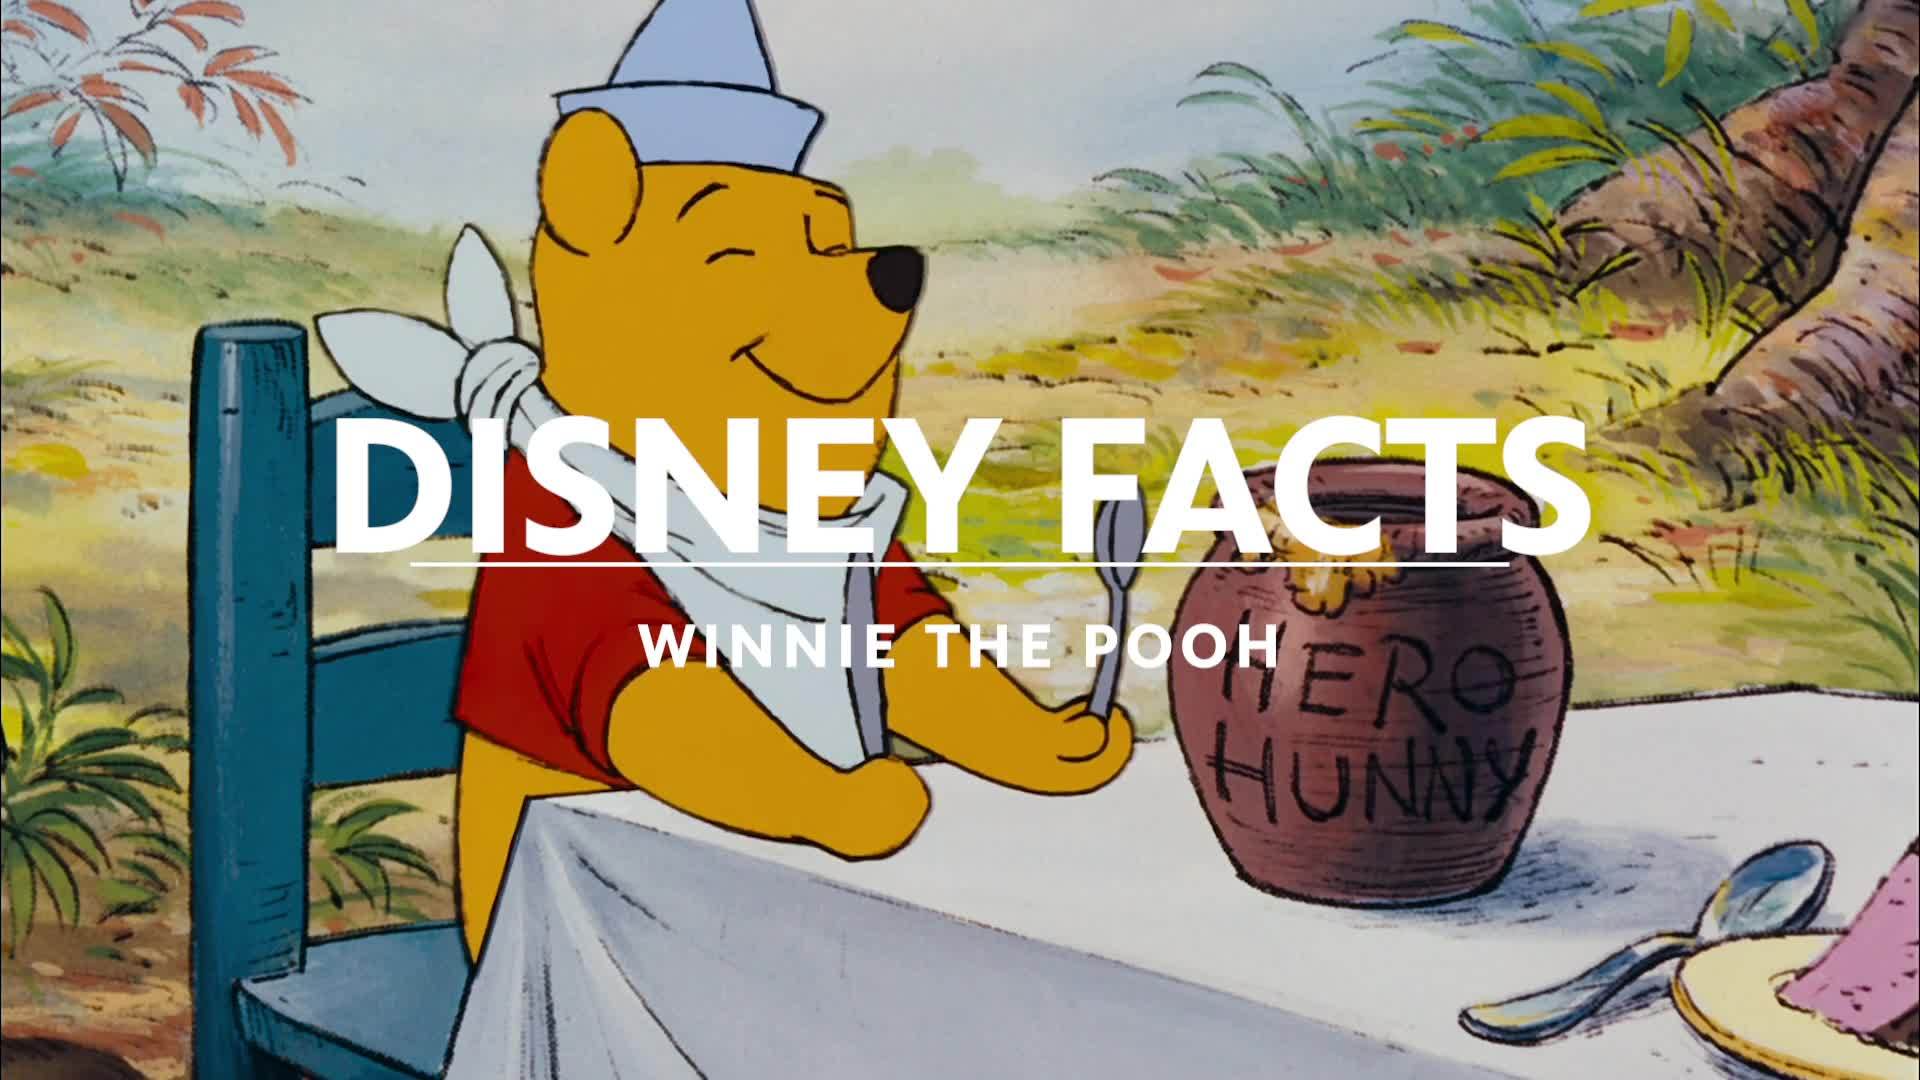 Fun Facts About Winnie the Pooh, Disney Facts